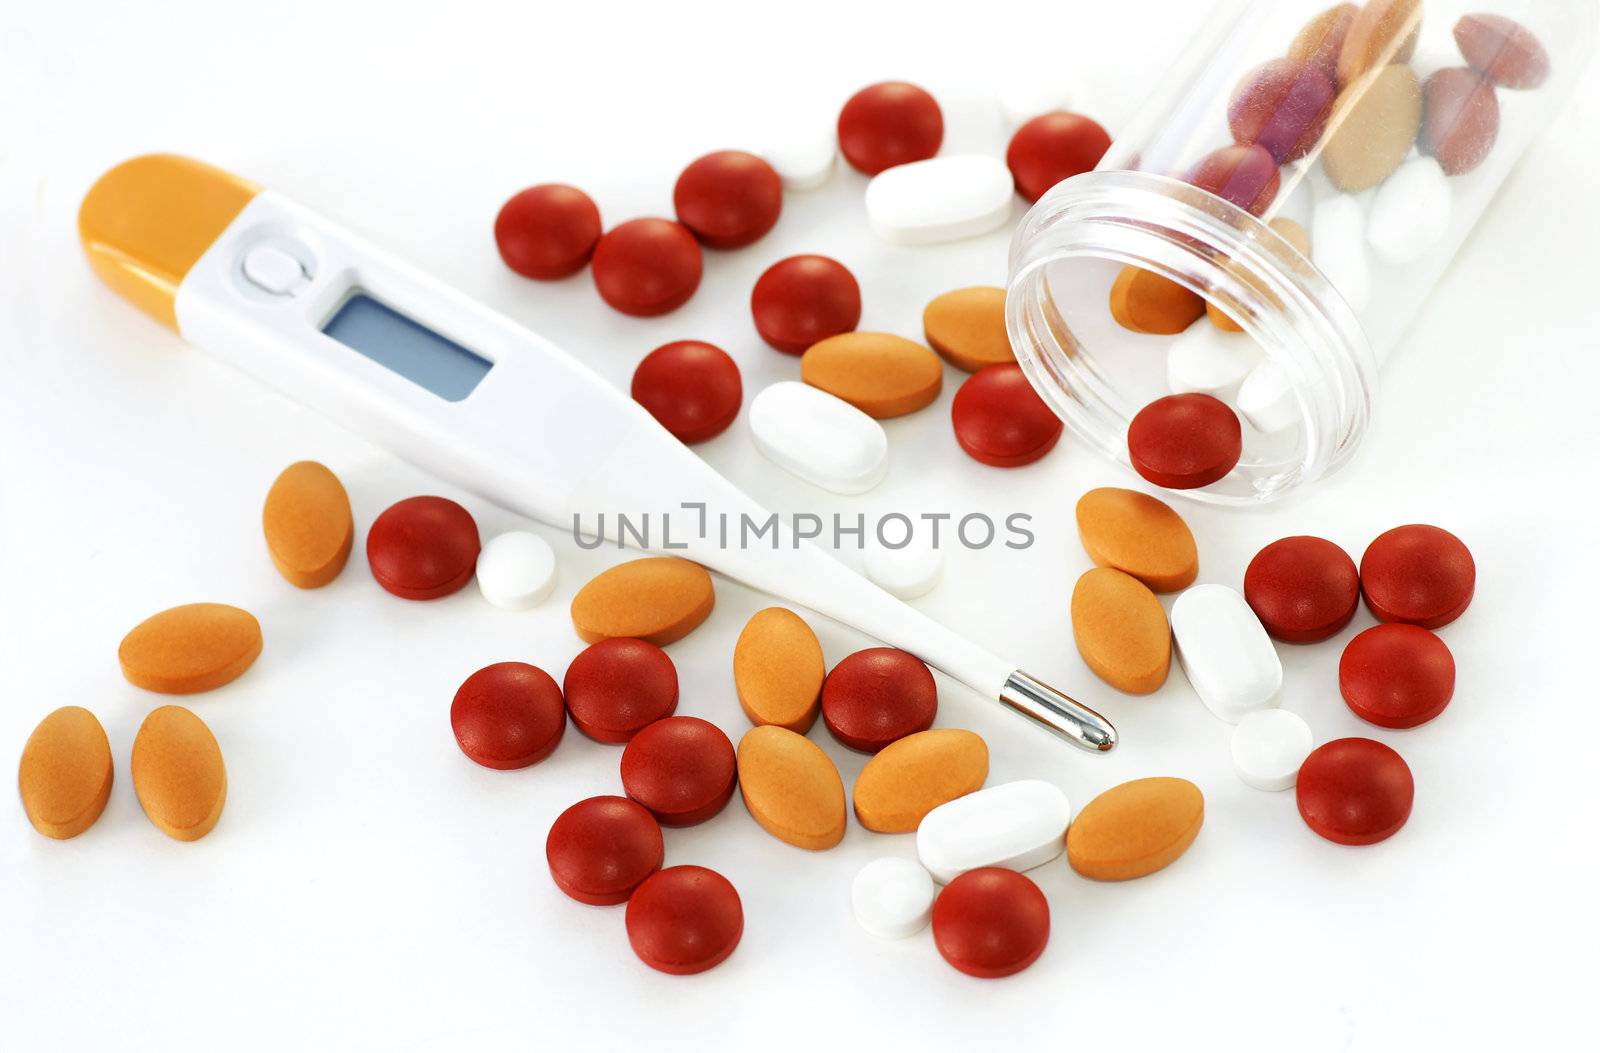 Thermometer and colorful pills by Mirage3